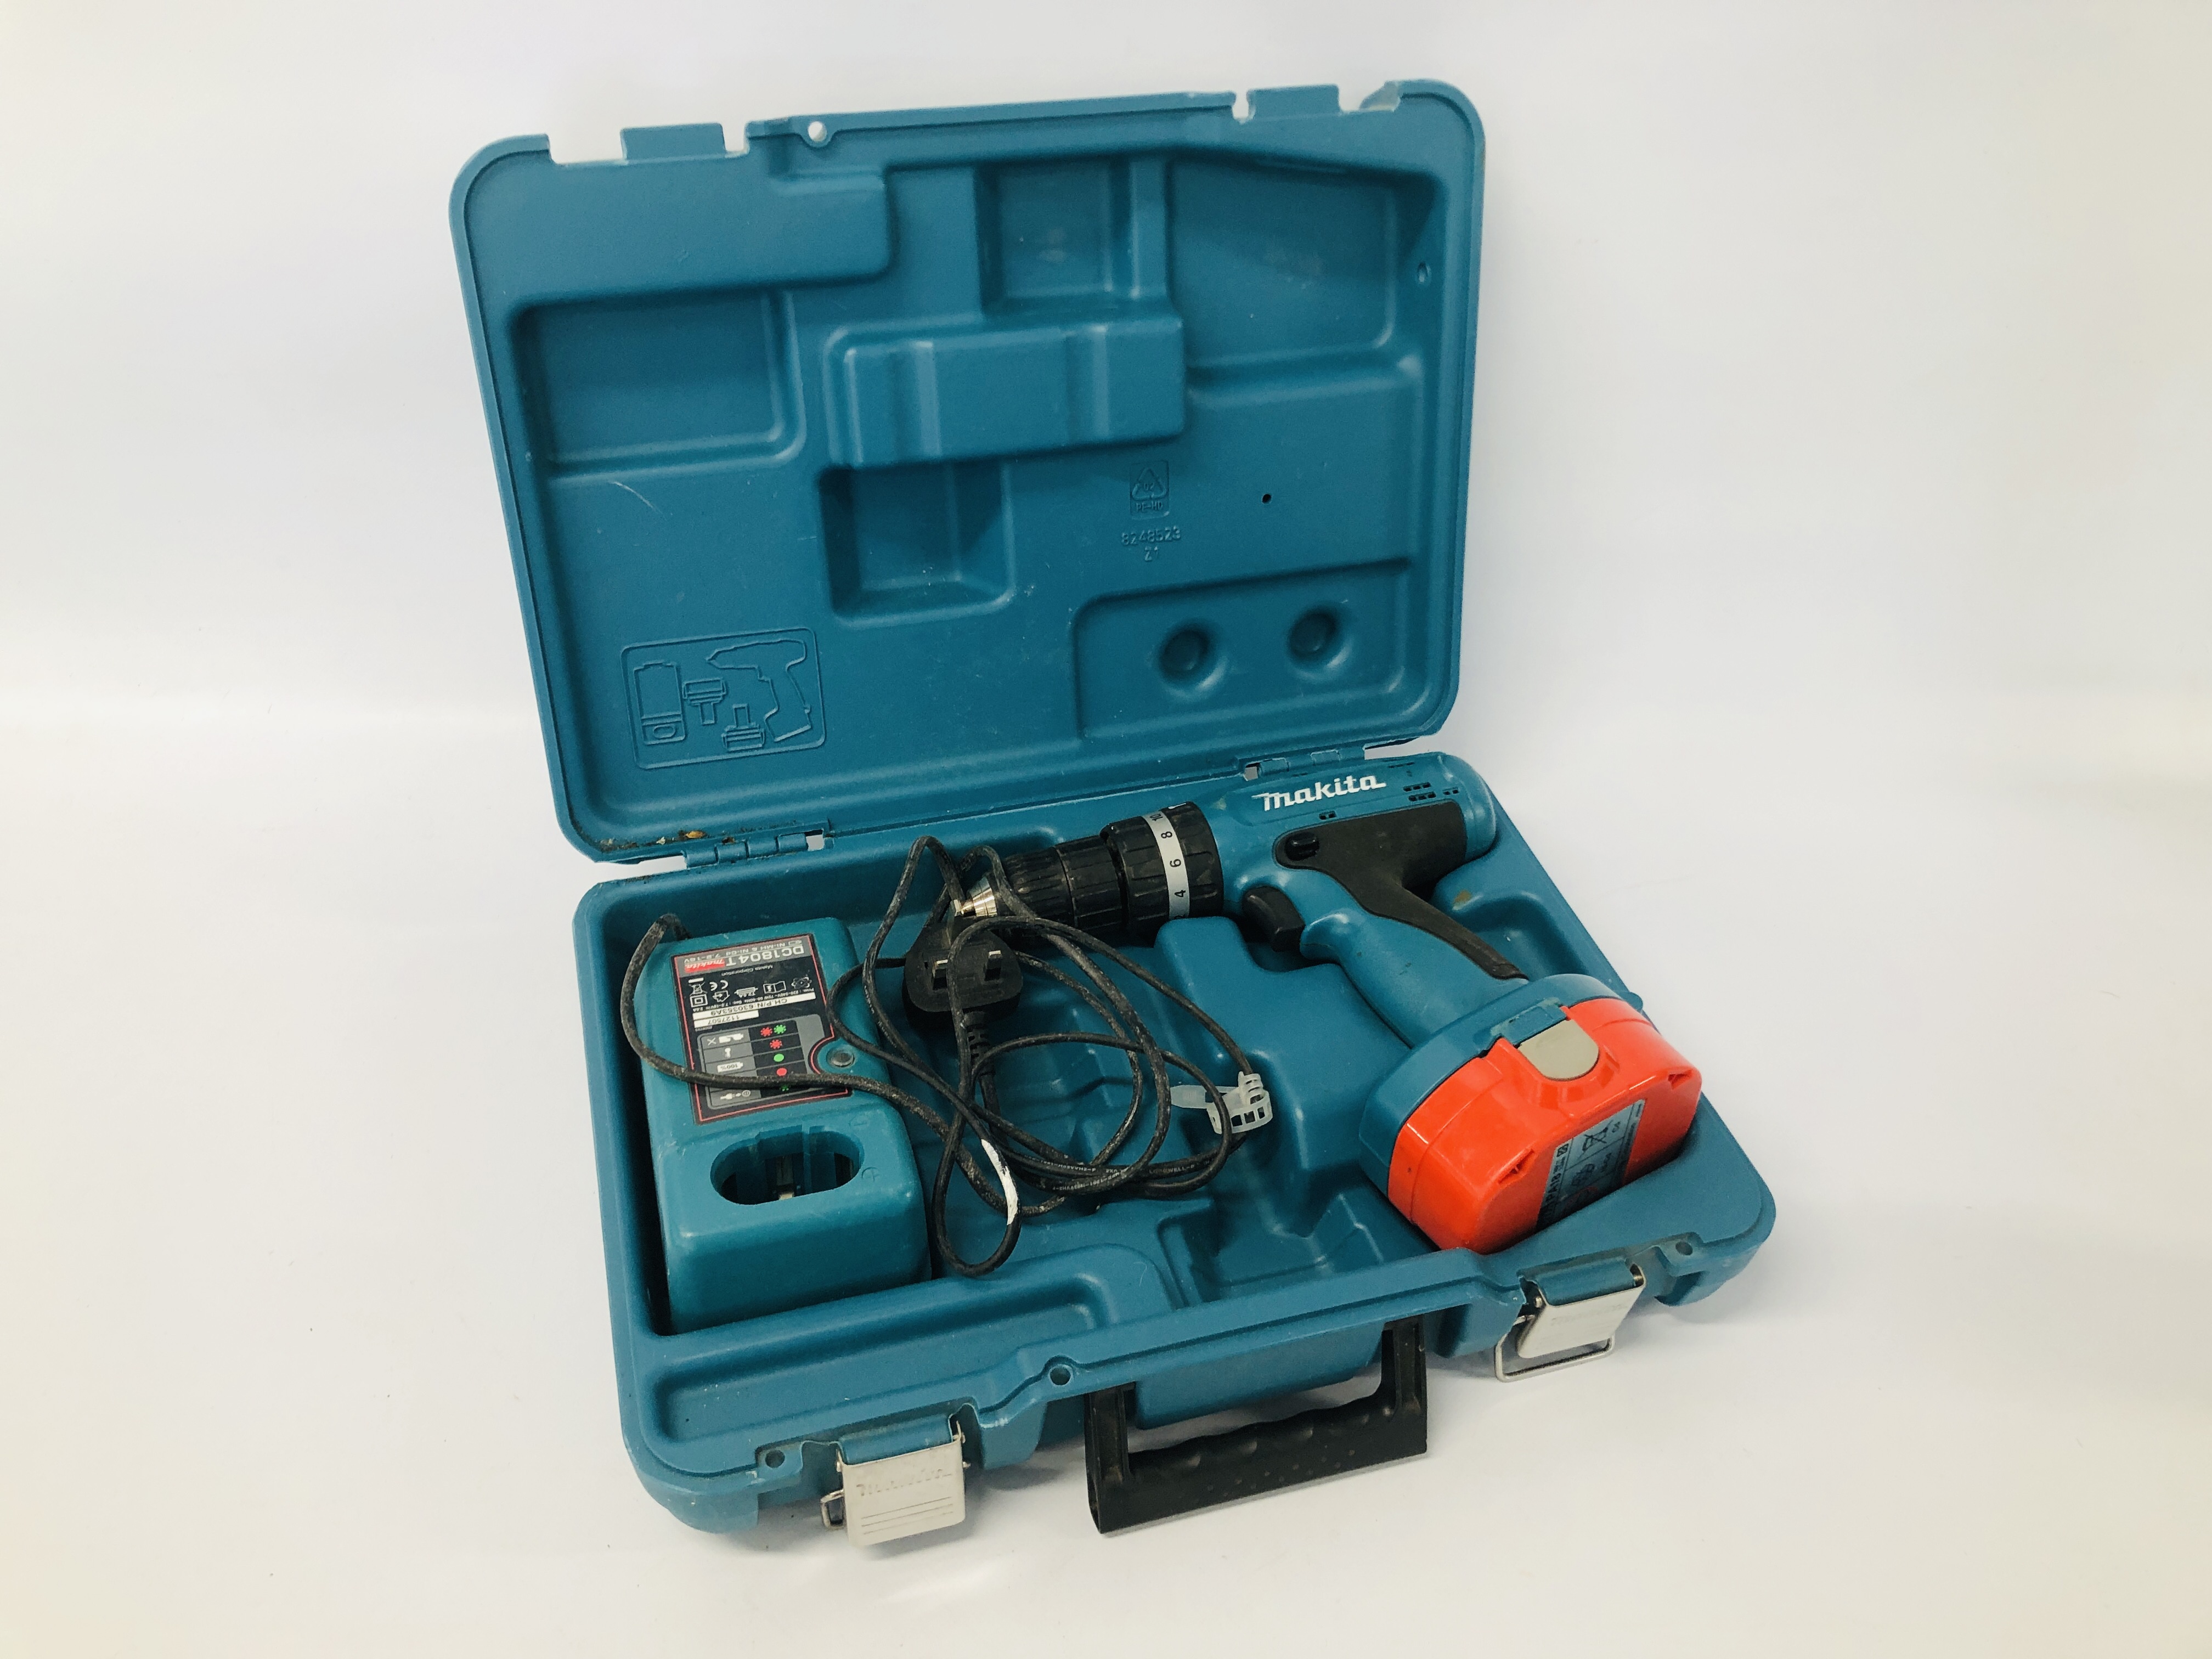 A MAKITA CORDLESS DRILL IN CARRY CASE COMPLETE WITH ONE BATTERY AND CHARGER - SOLD AS SEEN